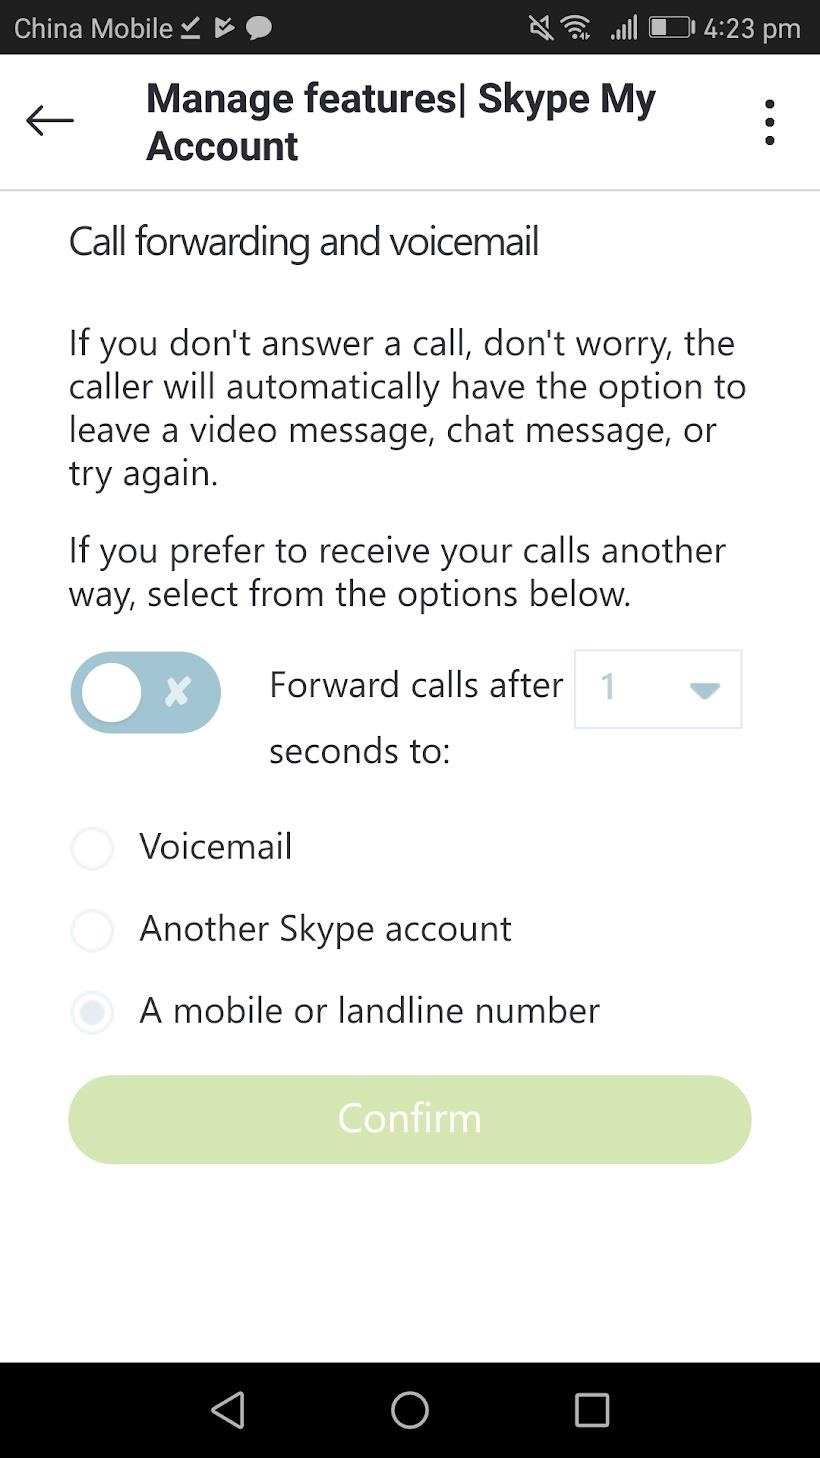 How to Forward Skype Calls to Your Phone Number on iPhone or Android